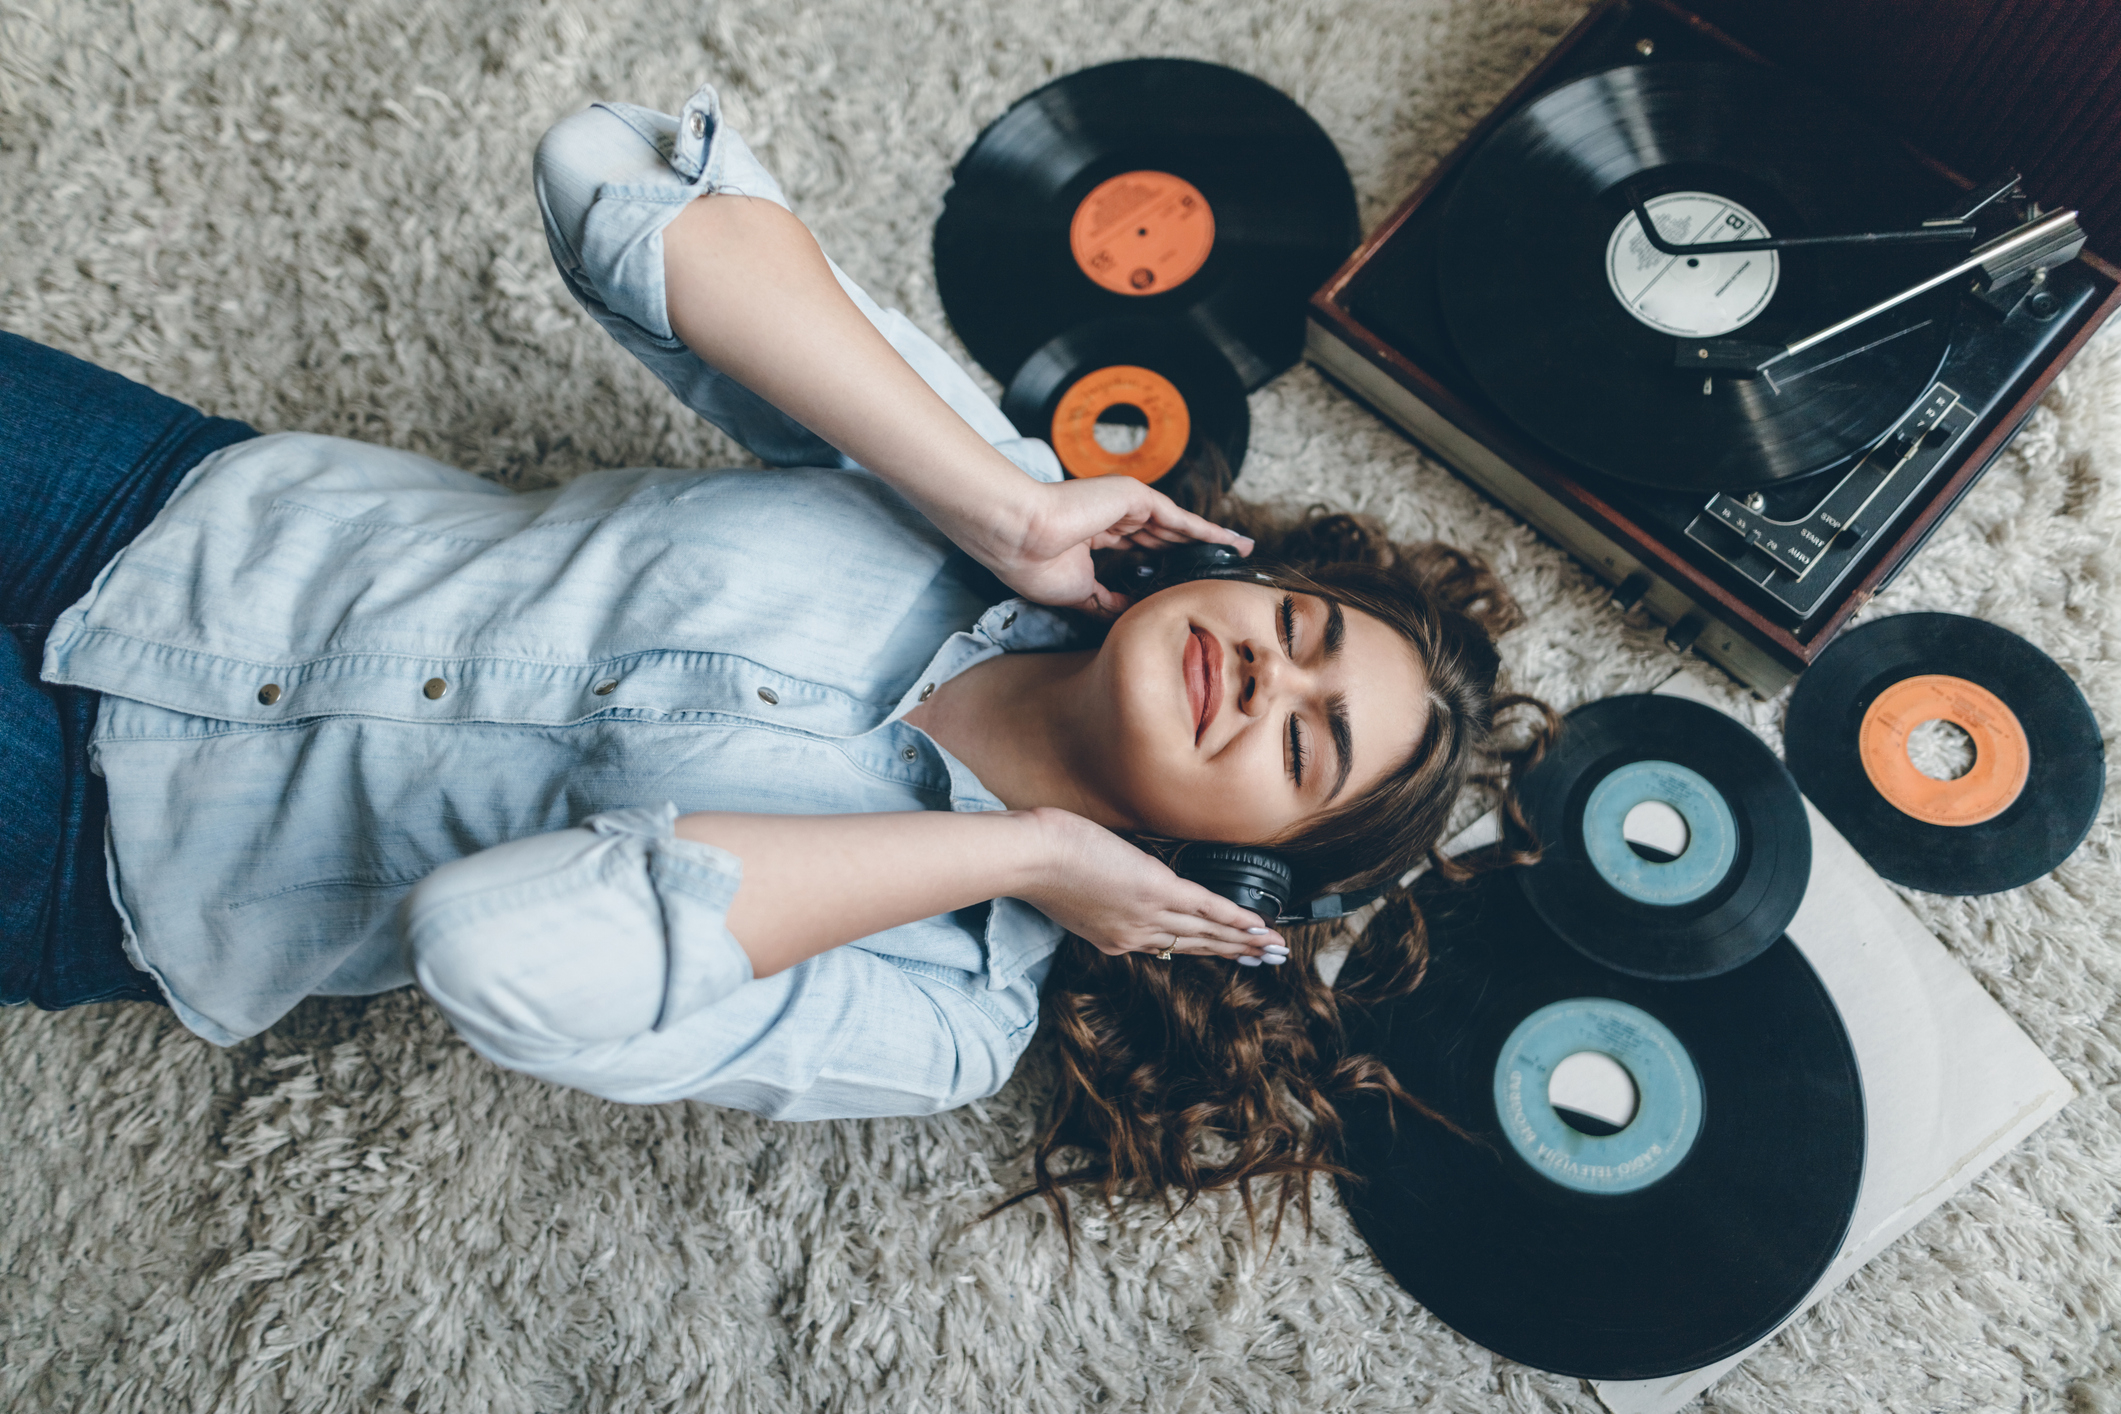 Woman lying on floor with headphones, surrounded by vinyl records and a turntable. She appears relaxed and happy